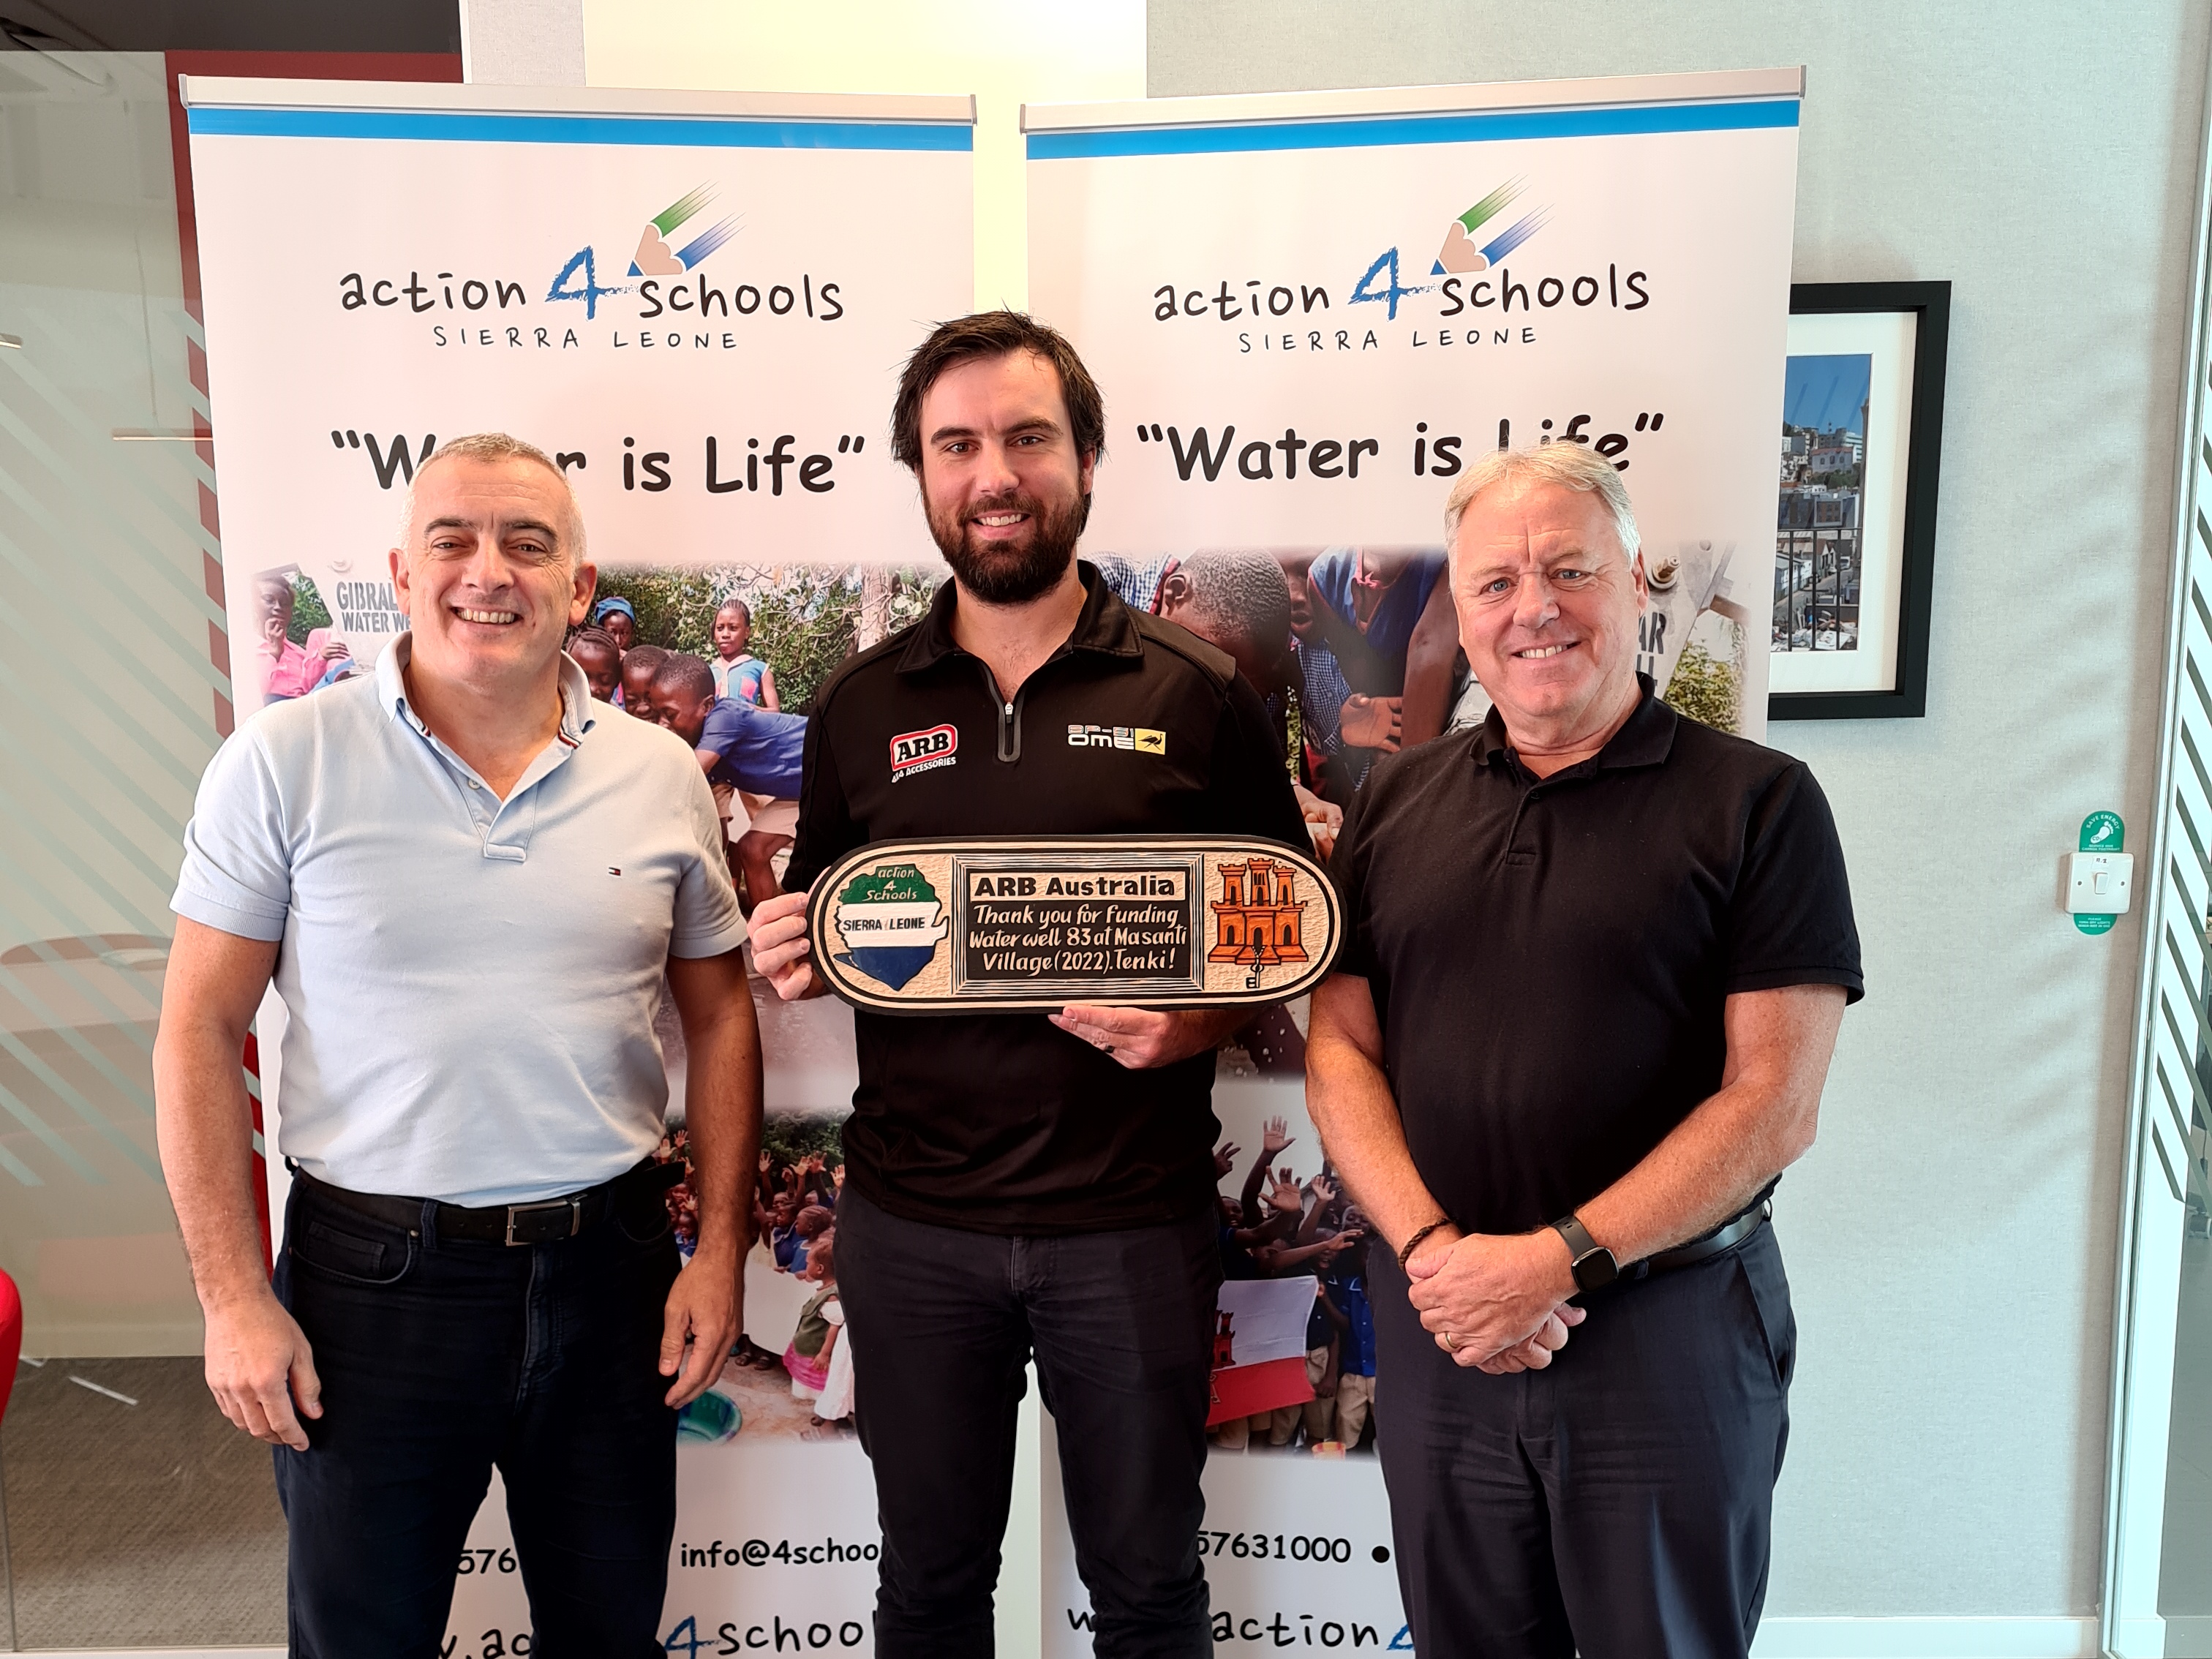 ARB Australia was presented with a wooden plaque as a token of our appreciation for funding Well No. 83